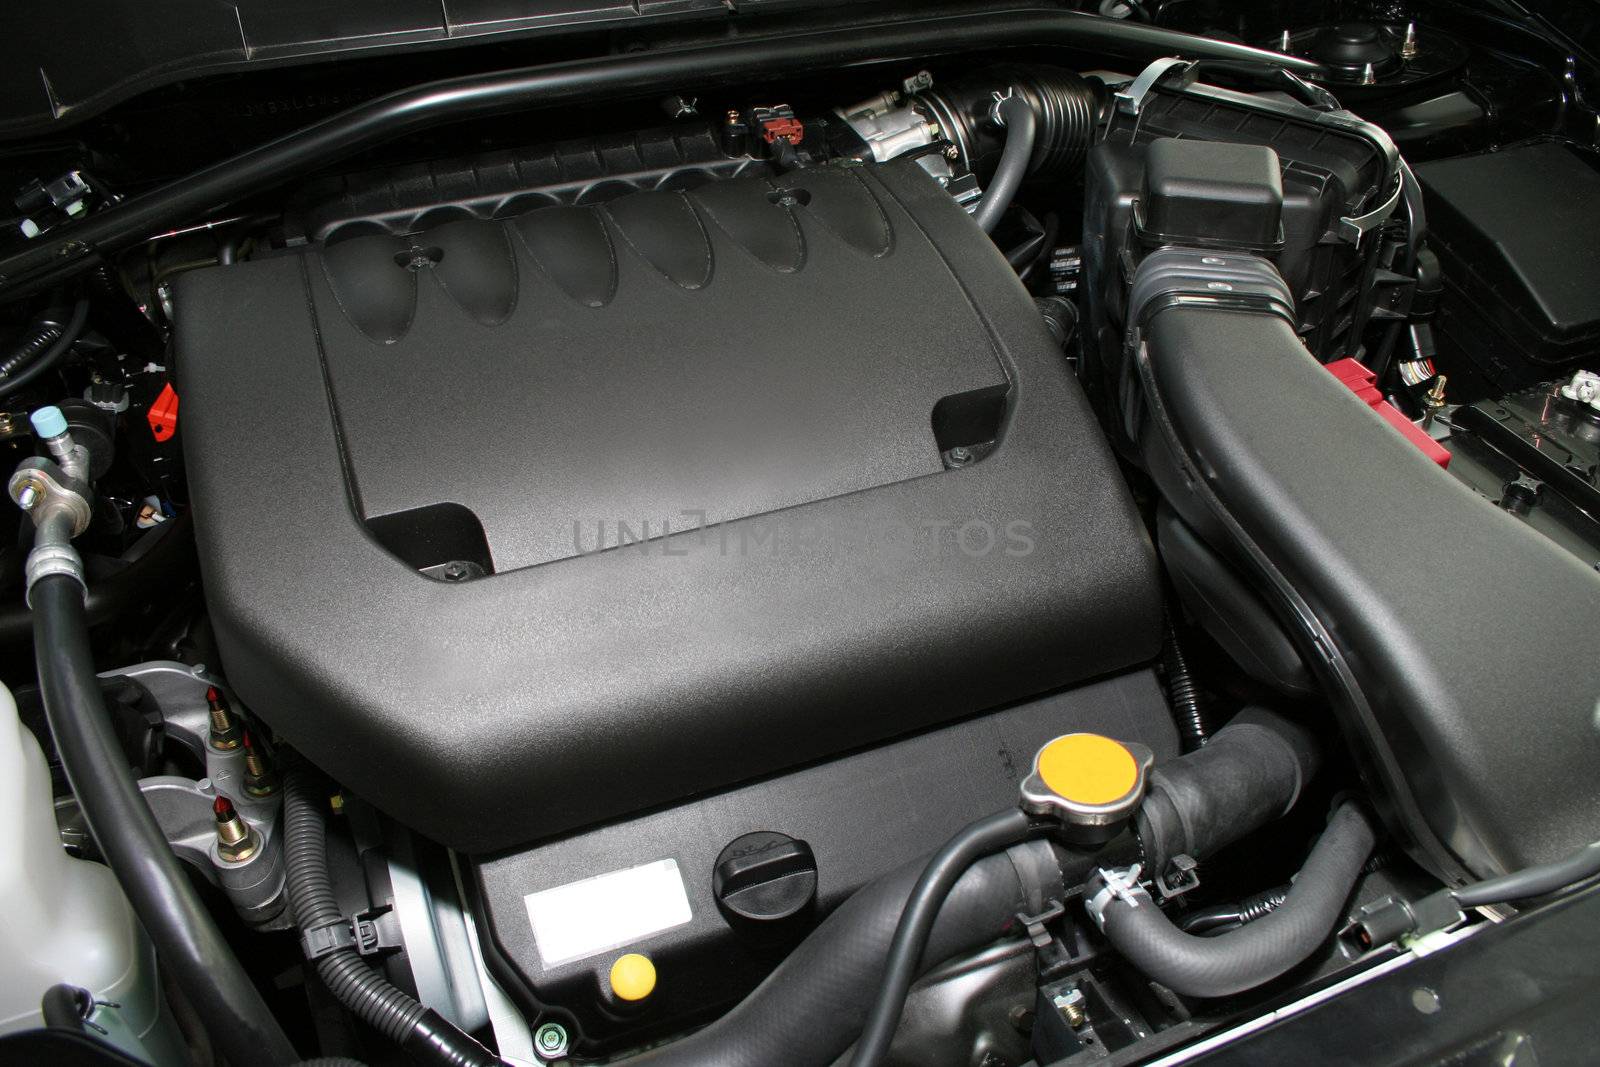 The powerful engine of the new car